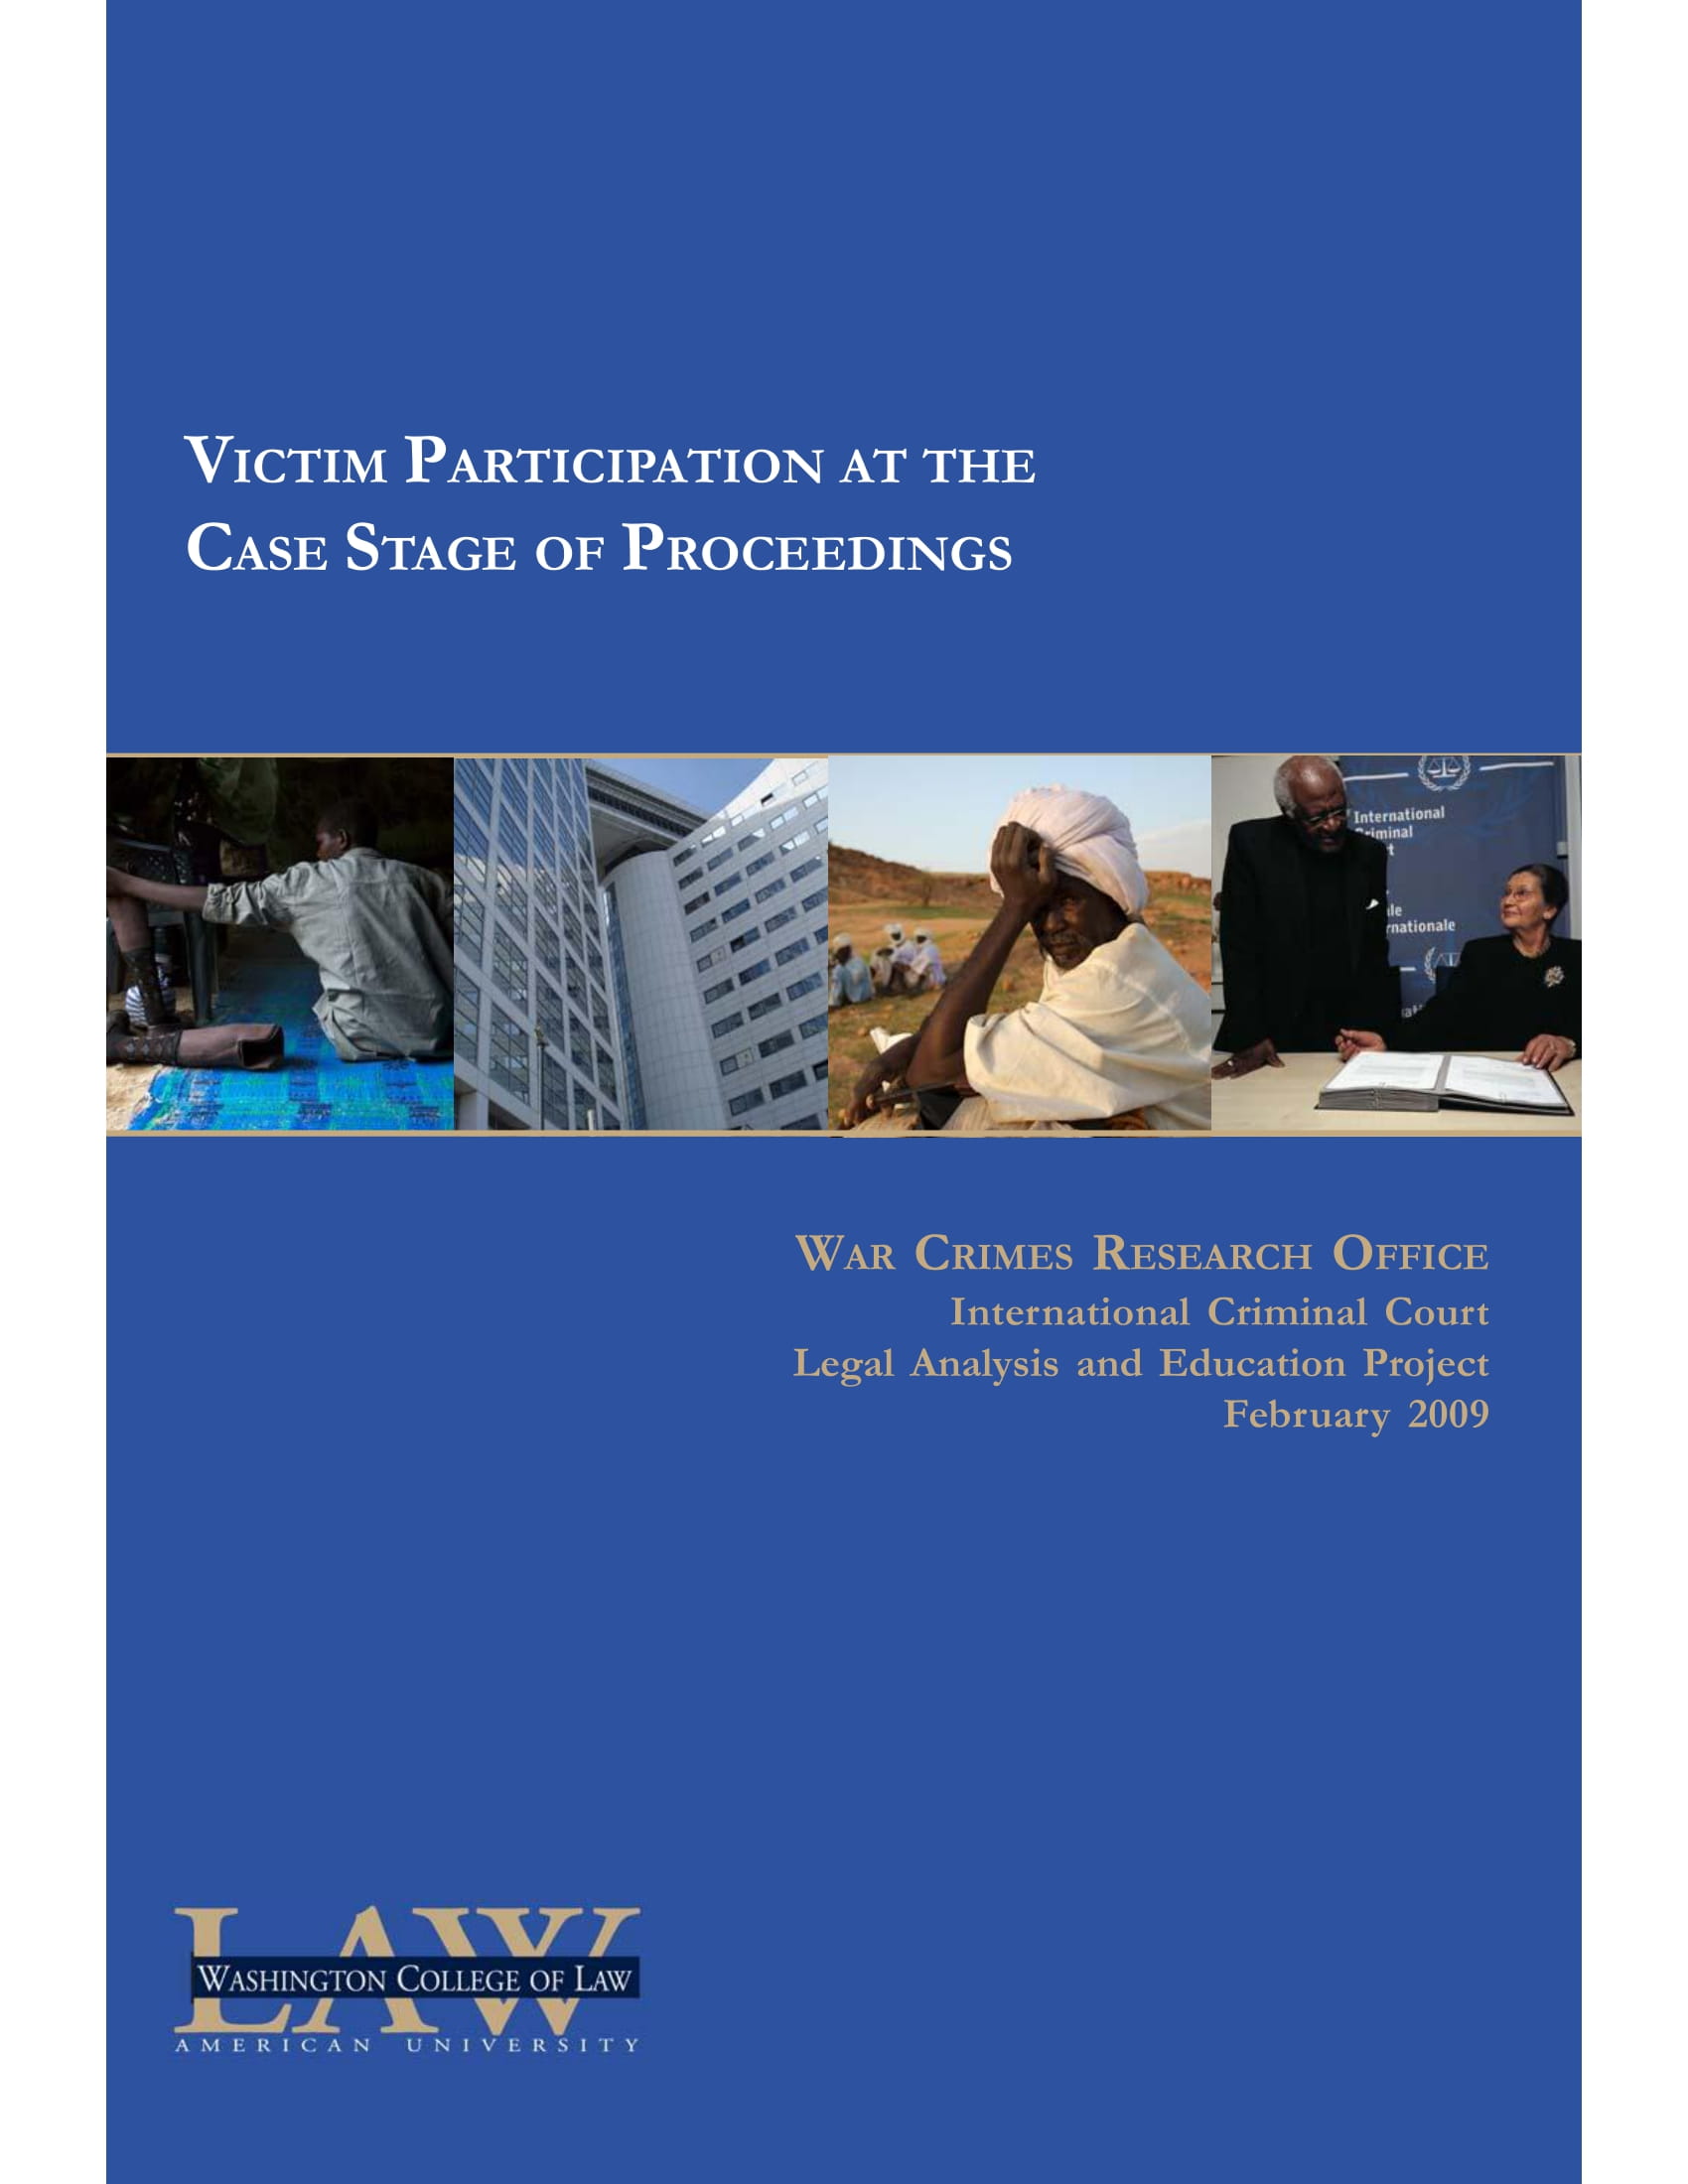 Report 6: Victim Participation at the Case Stage of Proceedings